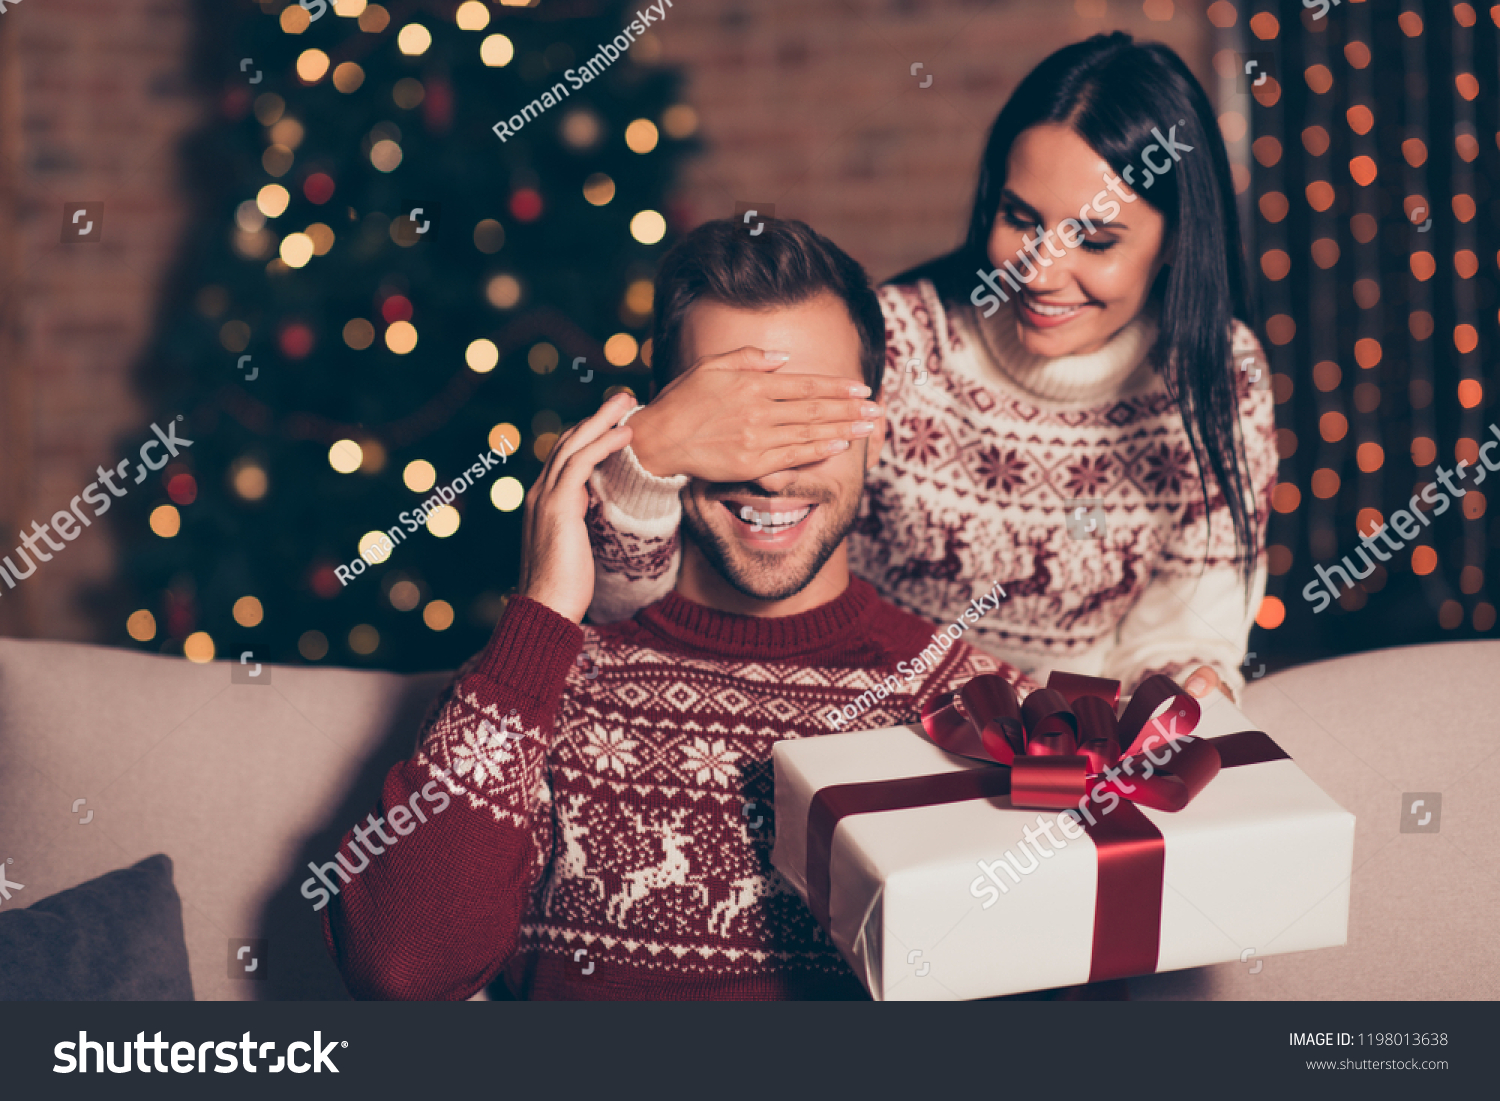 Hide and seek concept. Good-looking, attractive brunette lady in ornament sweater hold big package with bow, close eyes her man, who sit in cozy living room couch with lights garland decorations #1198013638